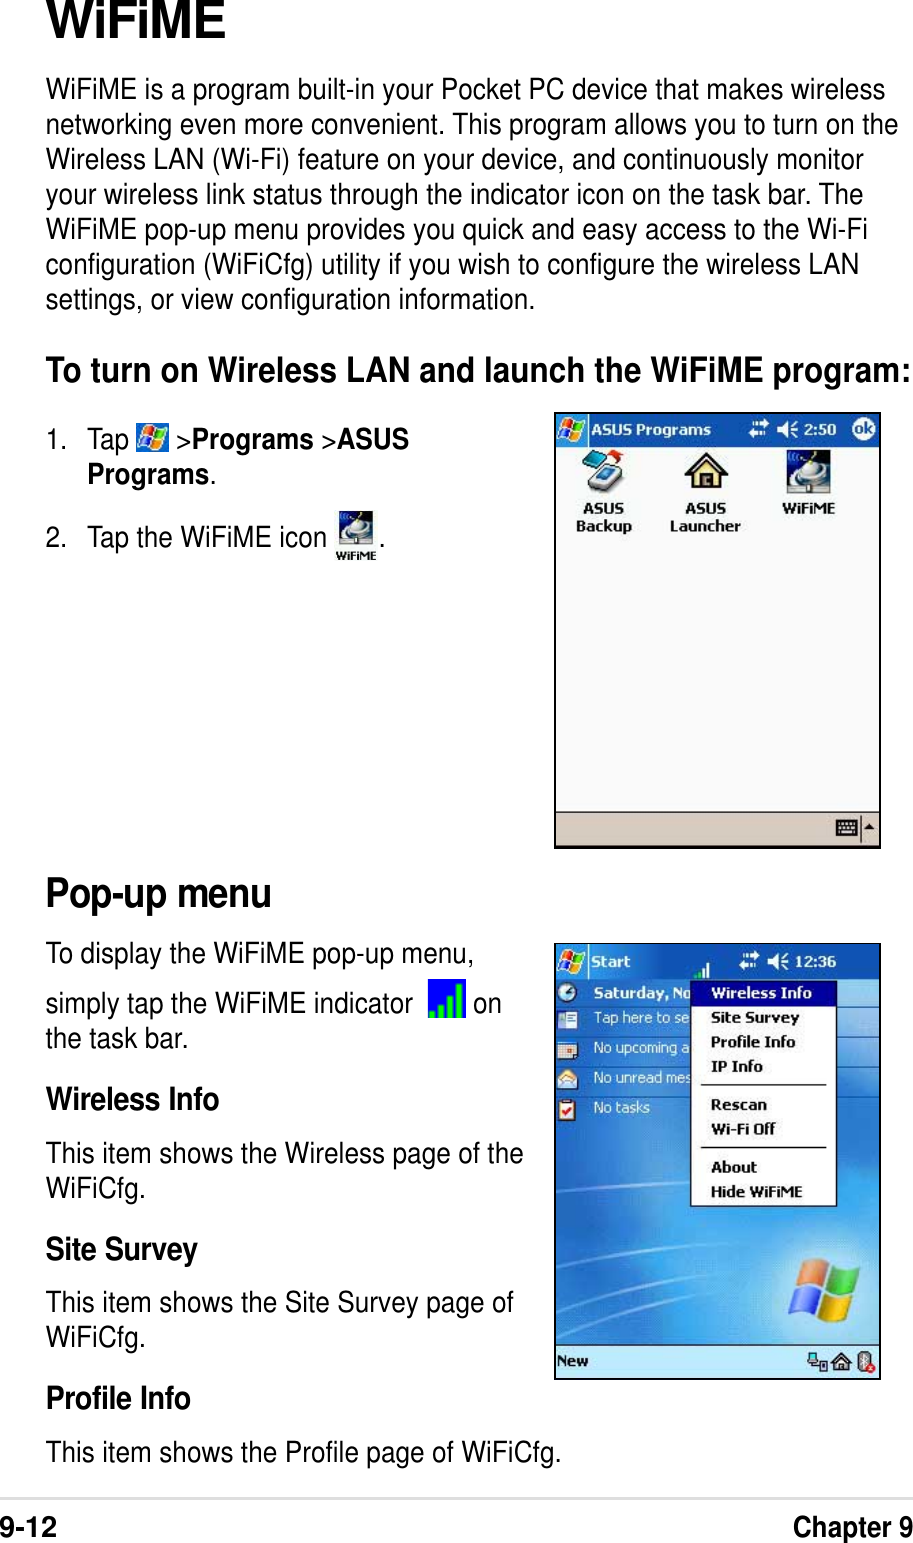 9-12Chapter 9WiFiMEWiFiME is a program built-in your Pocket PC device that makes wirelessnetworking even more convenient. This program allows you to turn on theWireless LAN (Wi-Fi) feature on your device, and continuously monitoryour wireless link status through the indicator icon on the task bar. TheWiFiME pop-up menu provides you quick and easy access to the Wi-Ficonfiguration (WiFiCfg) utility if you wish to configure the wireless LANsettings, or view configuration information.To turn on Wireless LAN and launch the WiFiME program:1. Tap   &gt;Programs &gt;ASUSPrograms.2. Tap the WiFiME icon  .Pop-up menuTo display the WiFiME pop-up menu,simply tap the WiFiME indicator    onthe task bar.Wireless InfoThis item shows the Wireless page of theWiFiCfg.Site SurveyThis item shows the Site Survey page ofWiFiCfg.Profile InfoThis item shows the Profile page of WiFiCfg.